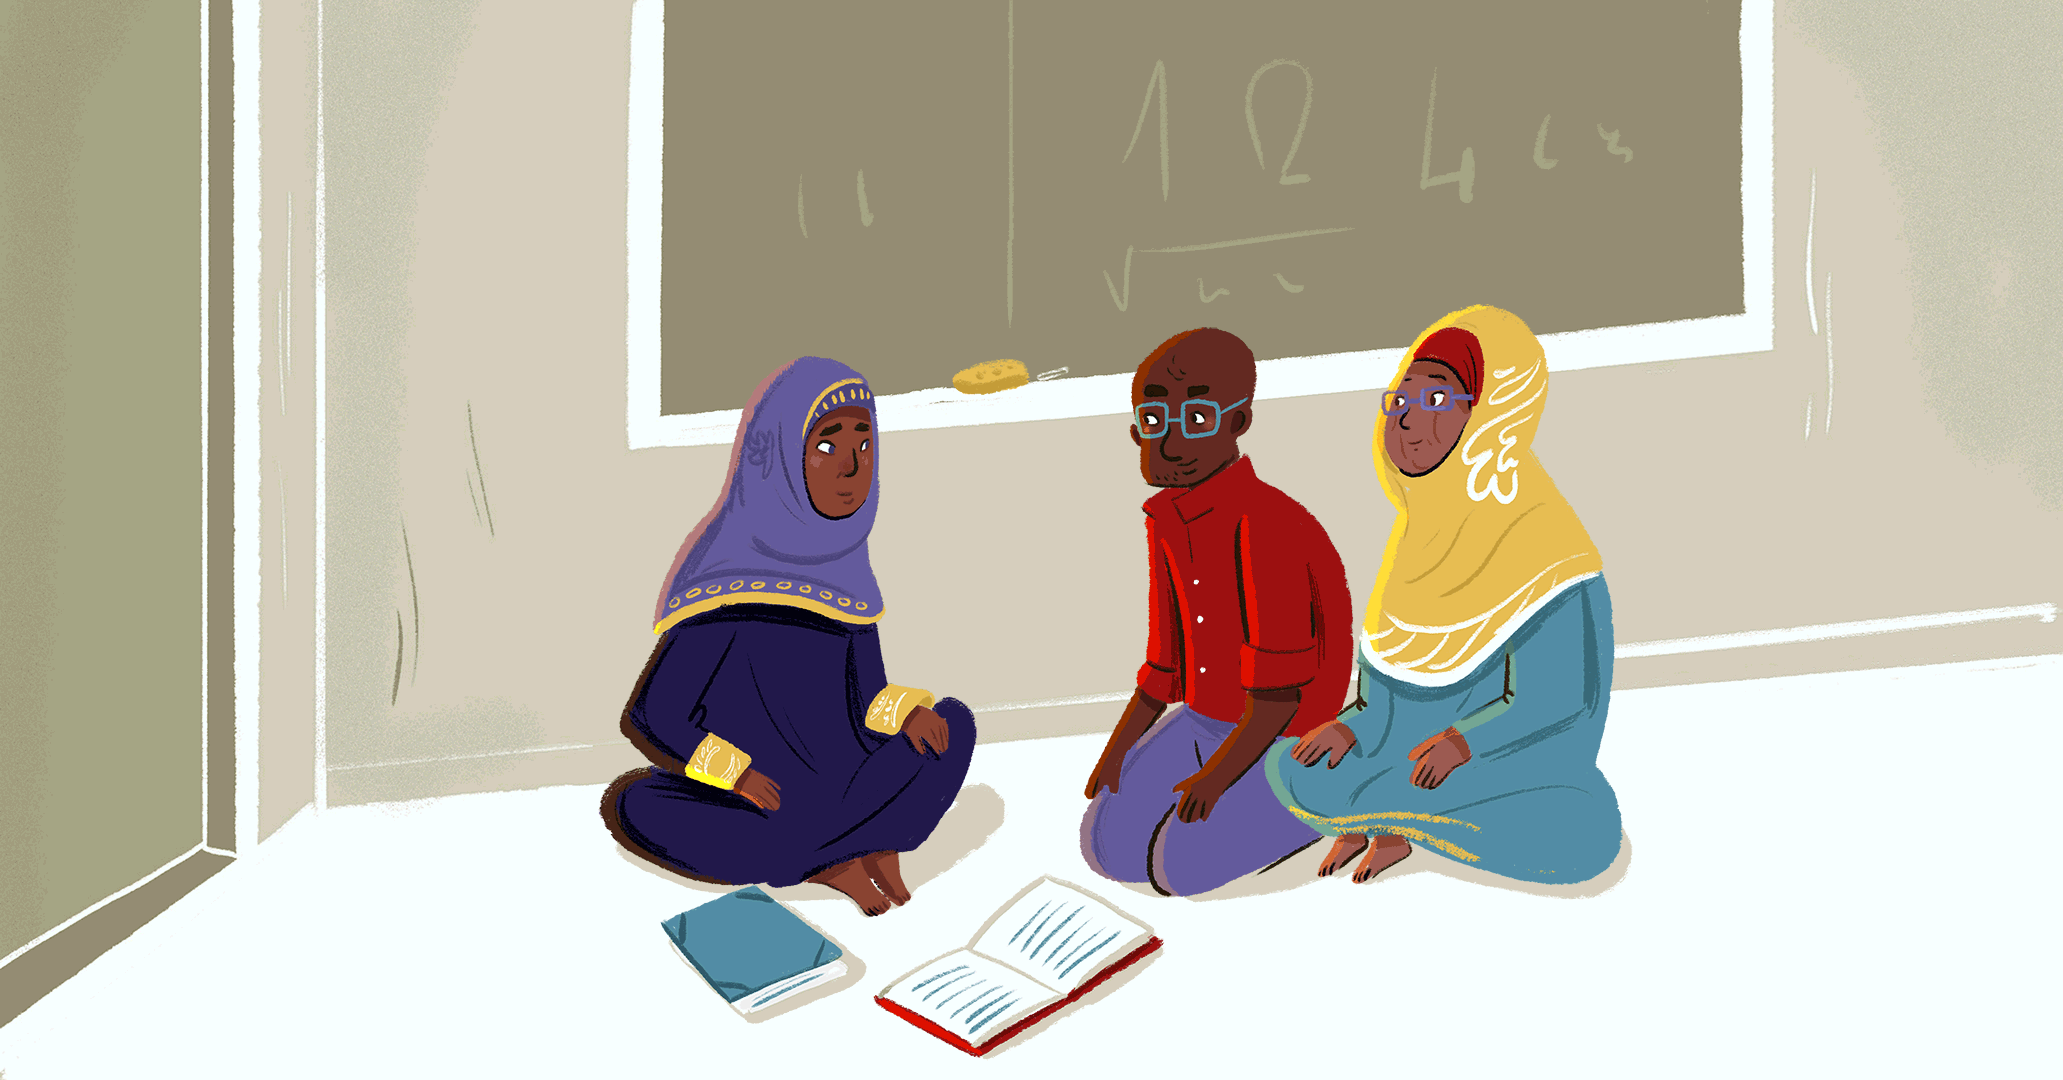 Three teachers are sitting on the floor of a classroom, discussing and sharing ideas.